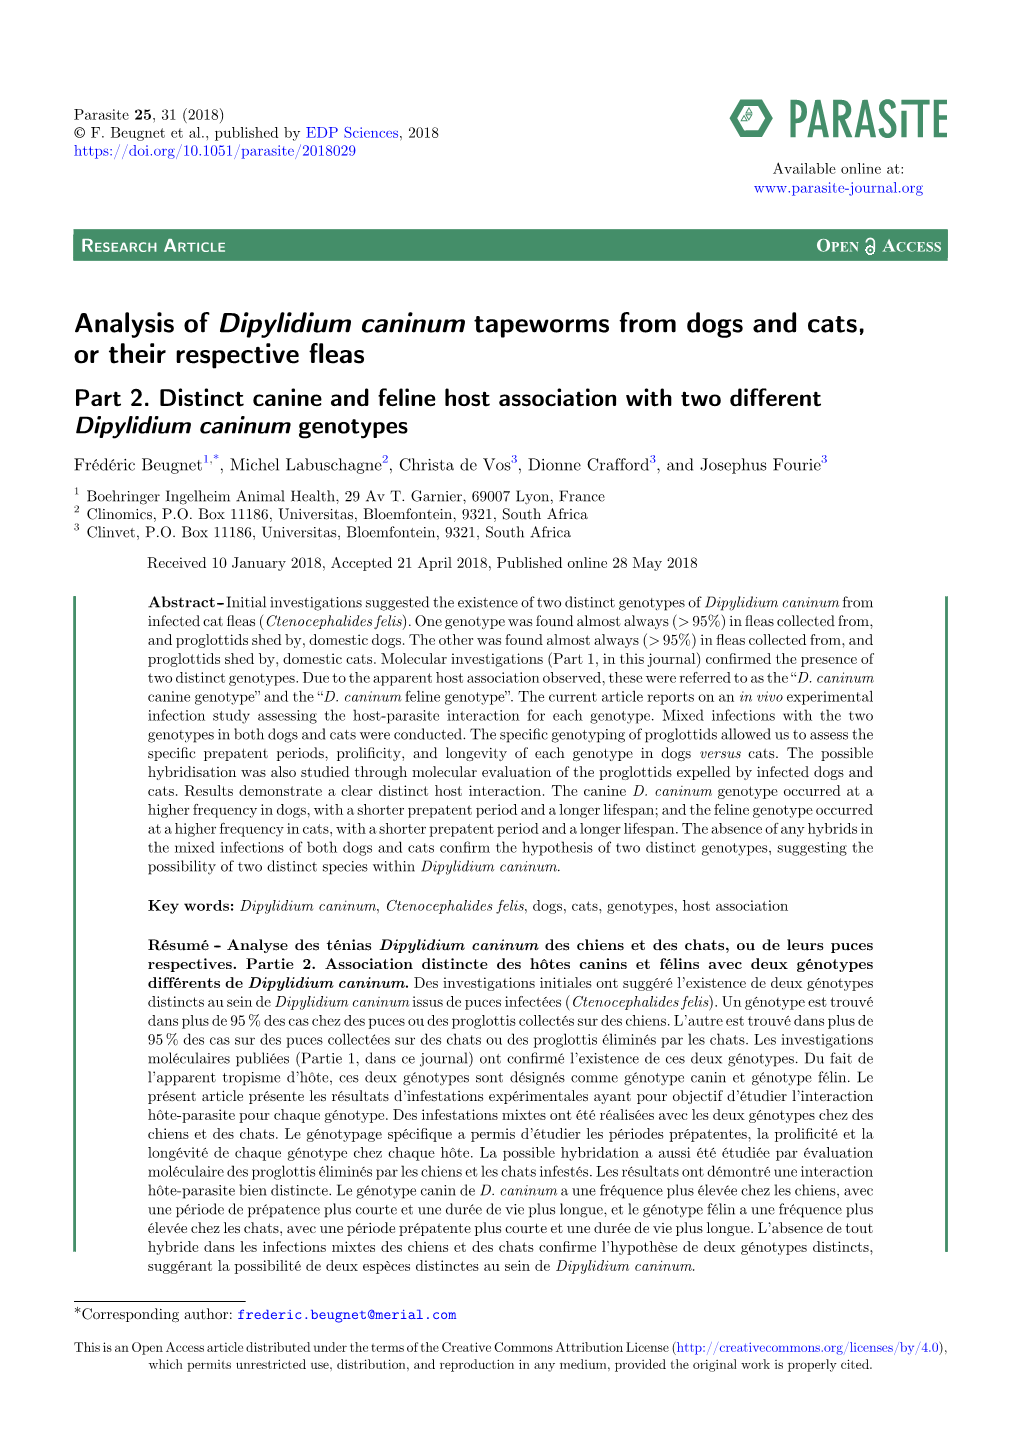 Analysis of Dipylidium Caninum Tapeworms from Dogs and Cats, Or Their Respective ﬂeas Part 2